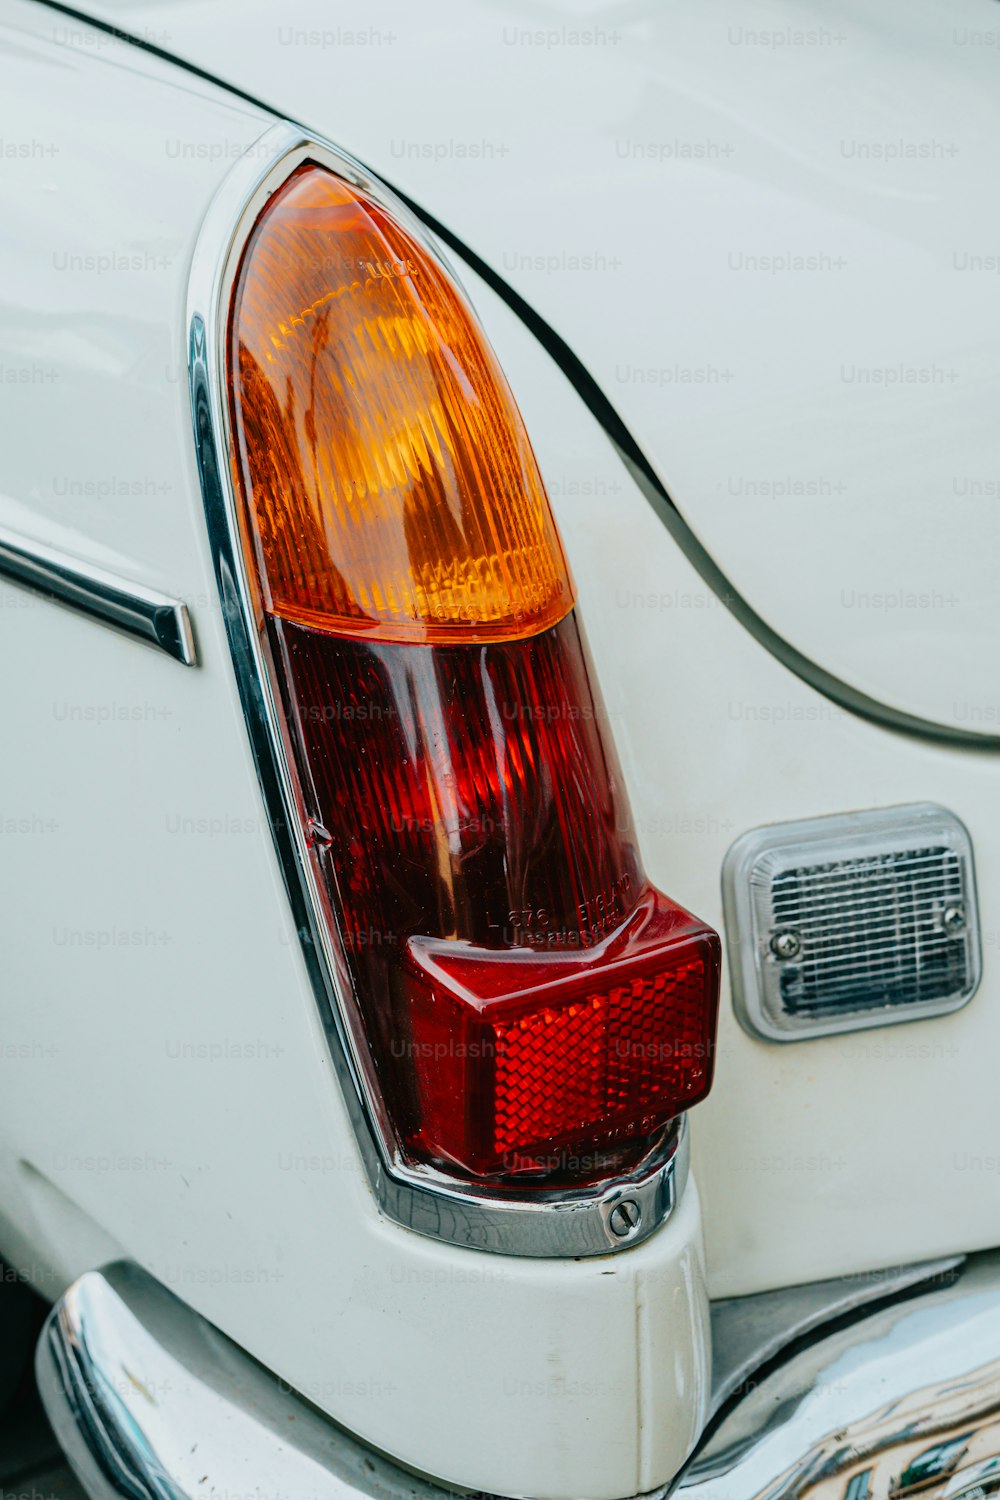 a close up of the tail light of a white car